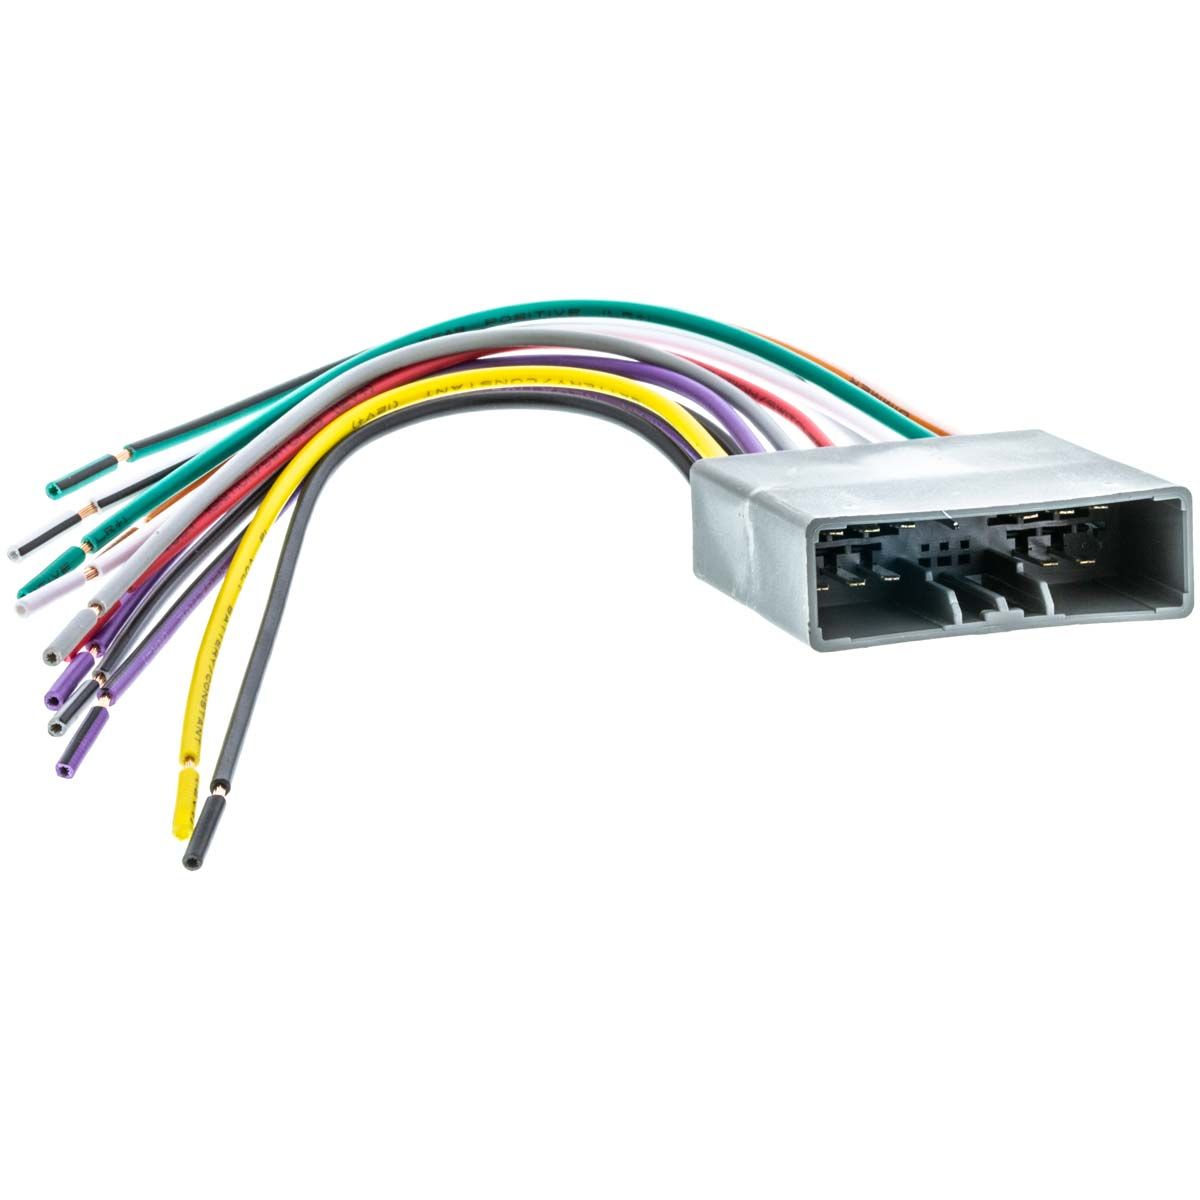 Metra 70-1722 Wiring Harness for Select 2006-UP Honda/Acura Vehicles 